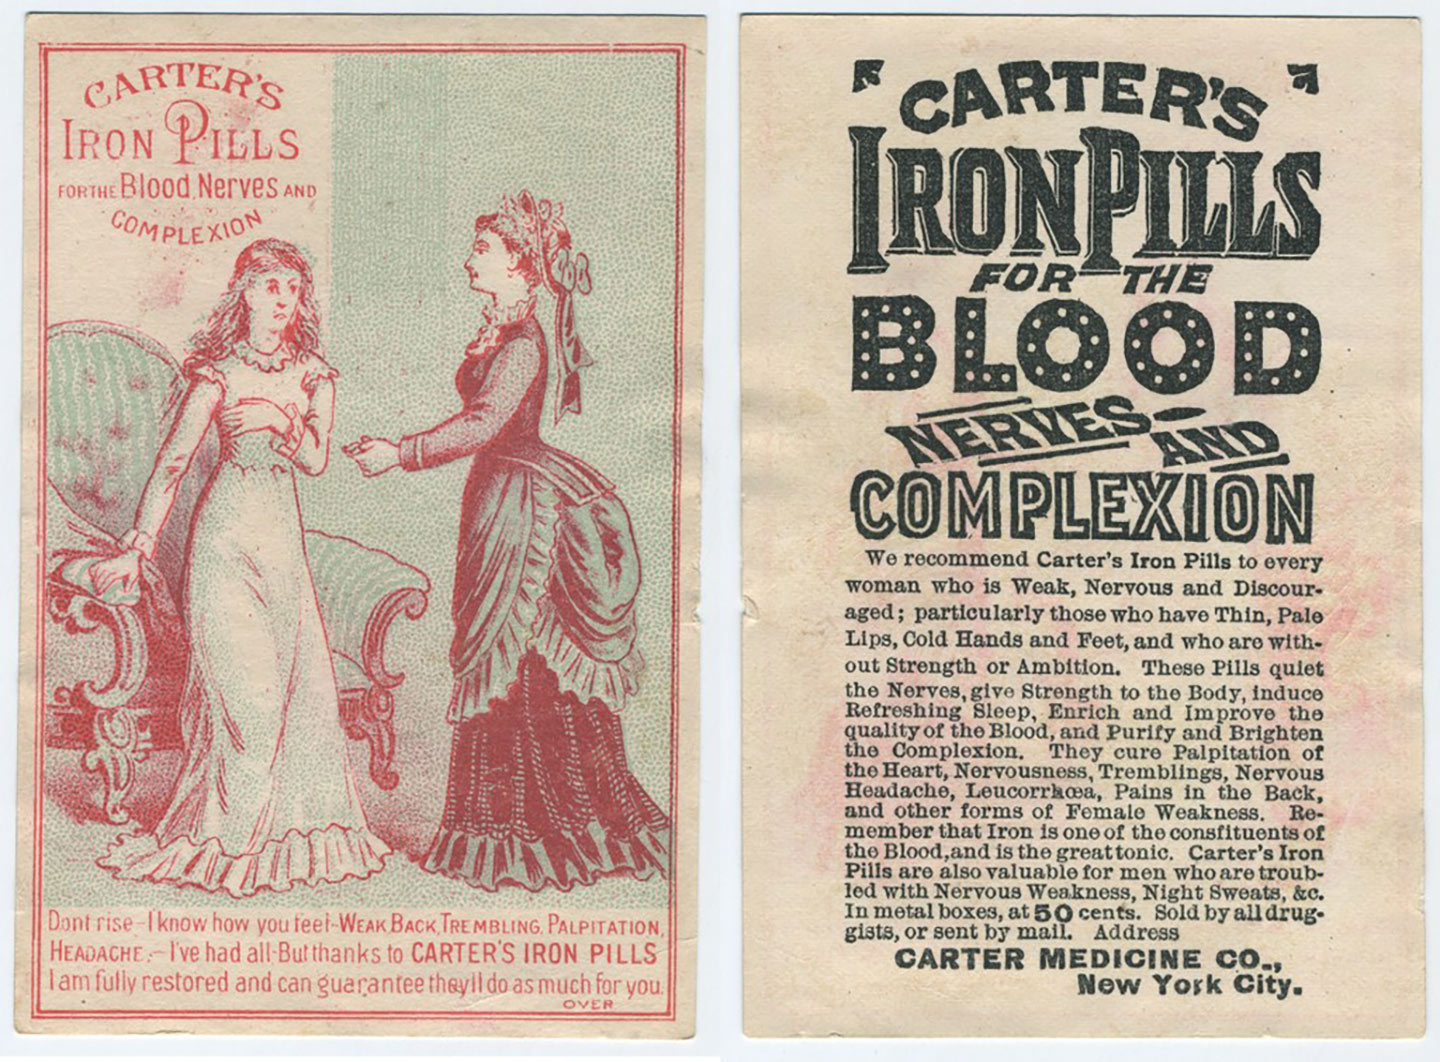 Advertisement by Carter's Medicine Co